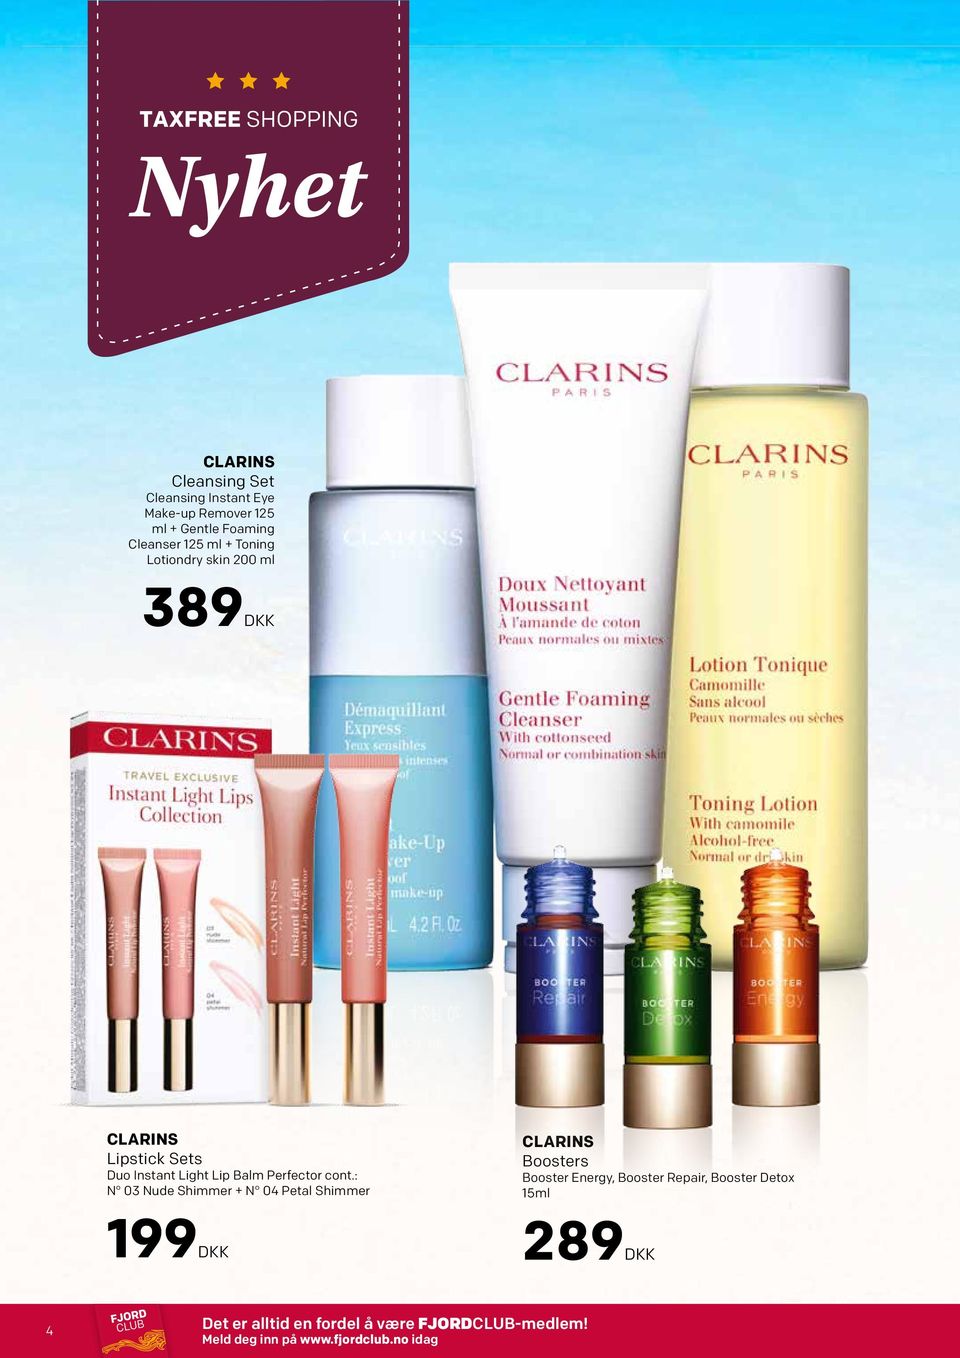 : N 03 Nude Shimmer + N 04 Petal Shimmer CLARINS Boosters Booster Energy, Booster Repair, Booster